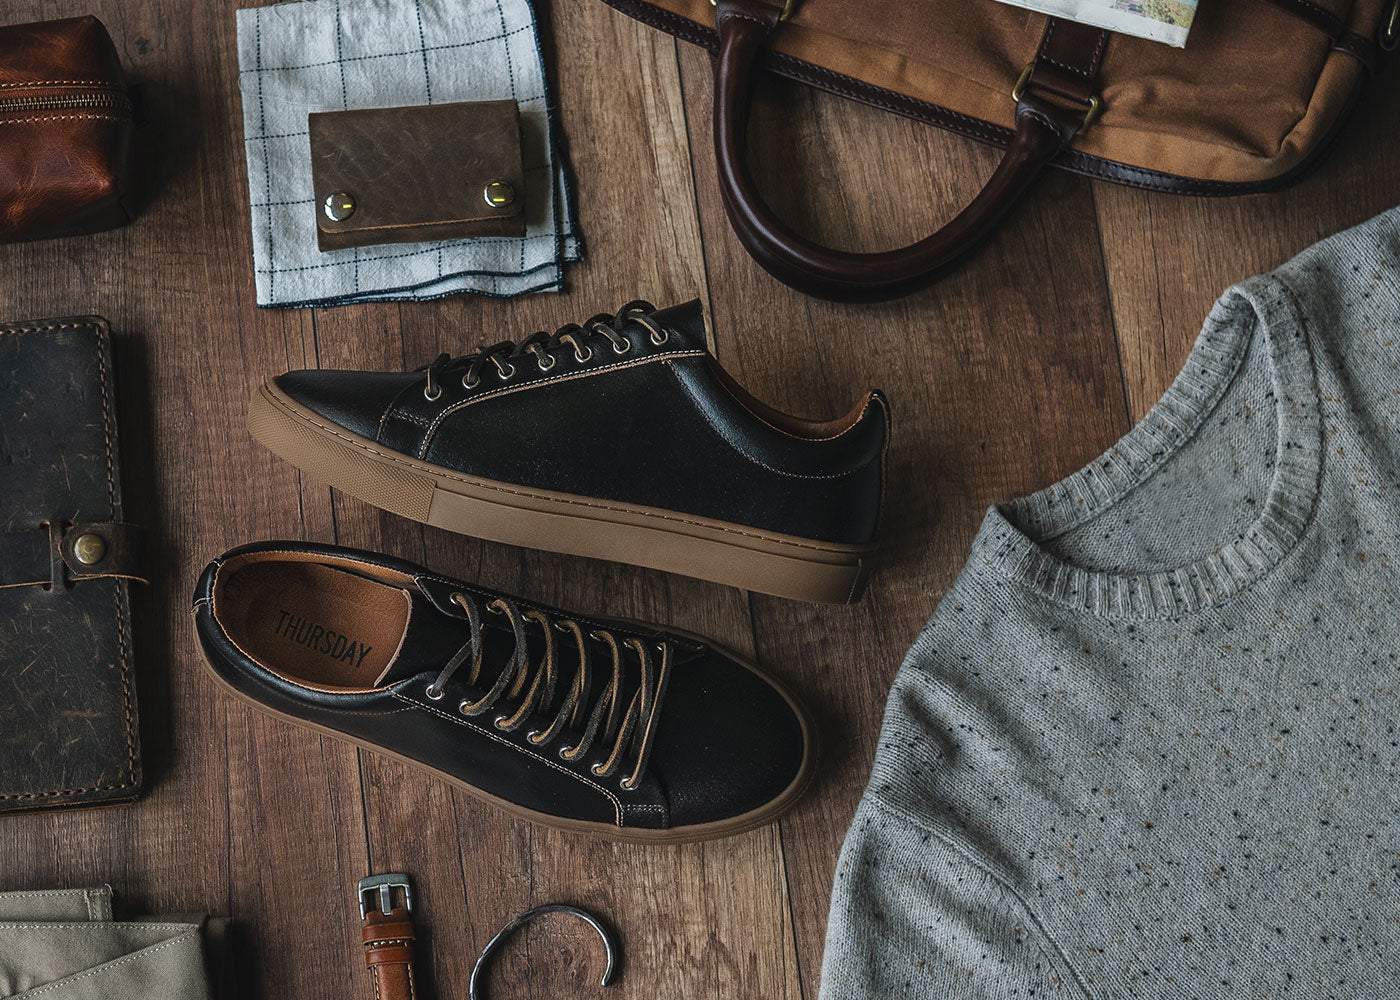 Best Brown Leather Sneaker: <a href="https://thursdayboots.com/products/mens-premier-low-top-sneaker-old-english-brown">The Old English Premier Low Top</a> <span style="color: #9b9b9b;">($129)</span>